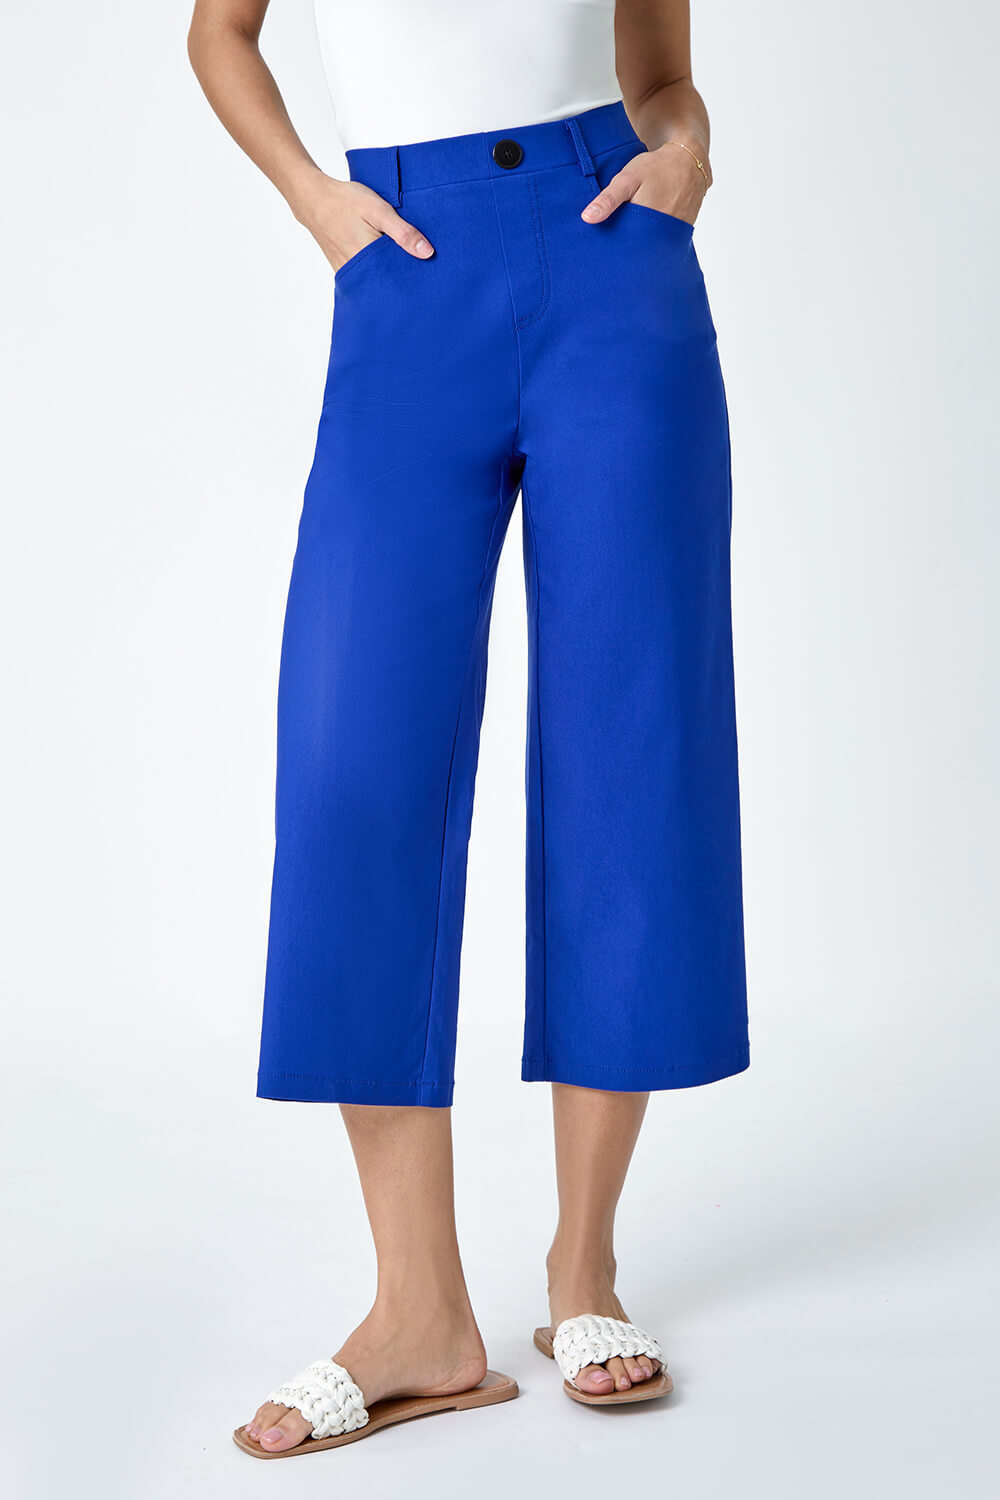 Royal Blue Cropped Stretch Culotte, Image 4 of 5